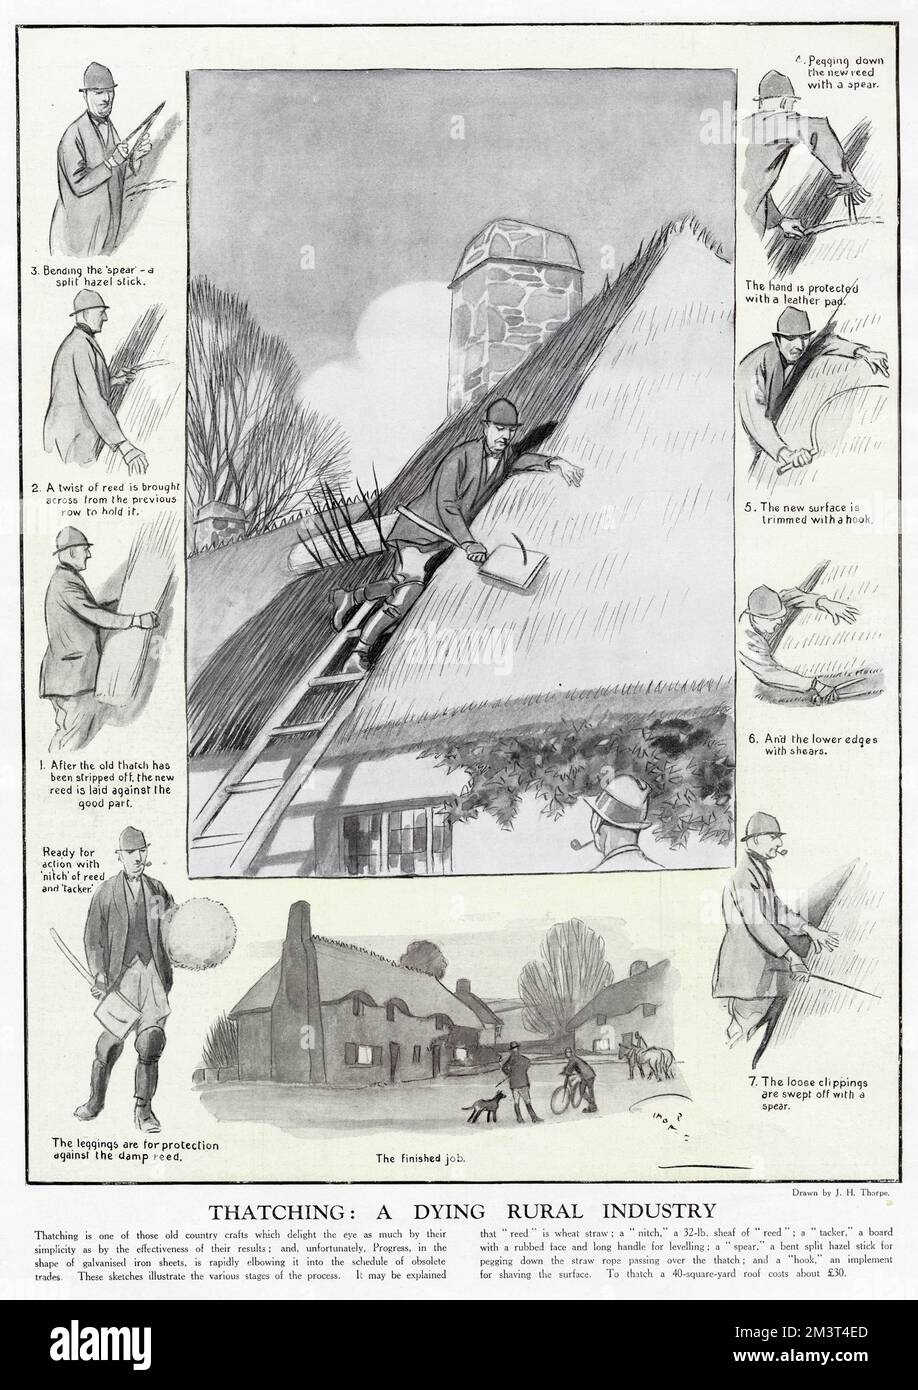 Illustration by James Thorpe in The Graphic demonstrating the techniques used by a thatcher. Thatching, remarks the magazine, is a dying rural industry, even by the 1920s. Stock Photo